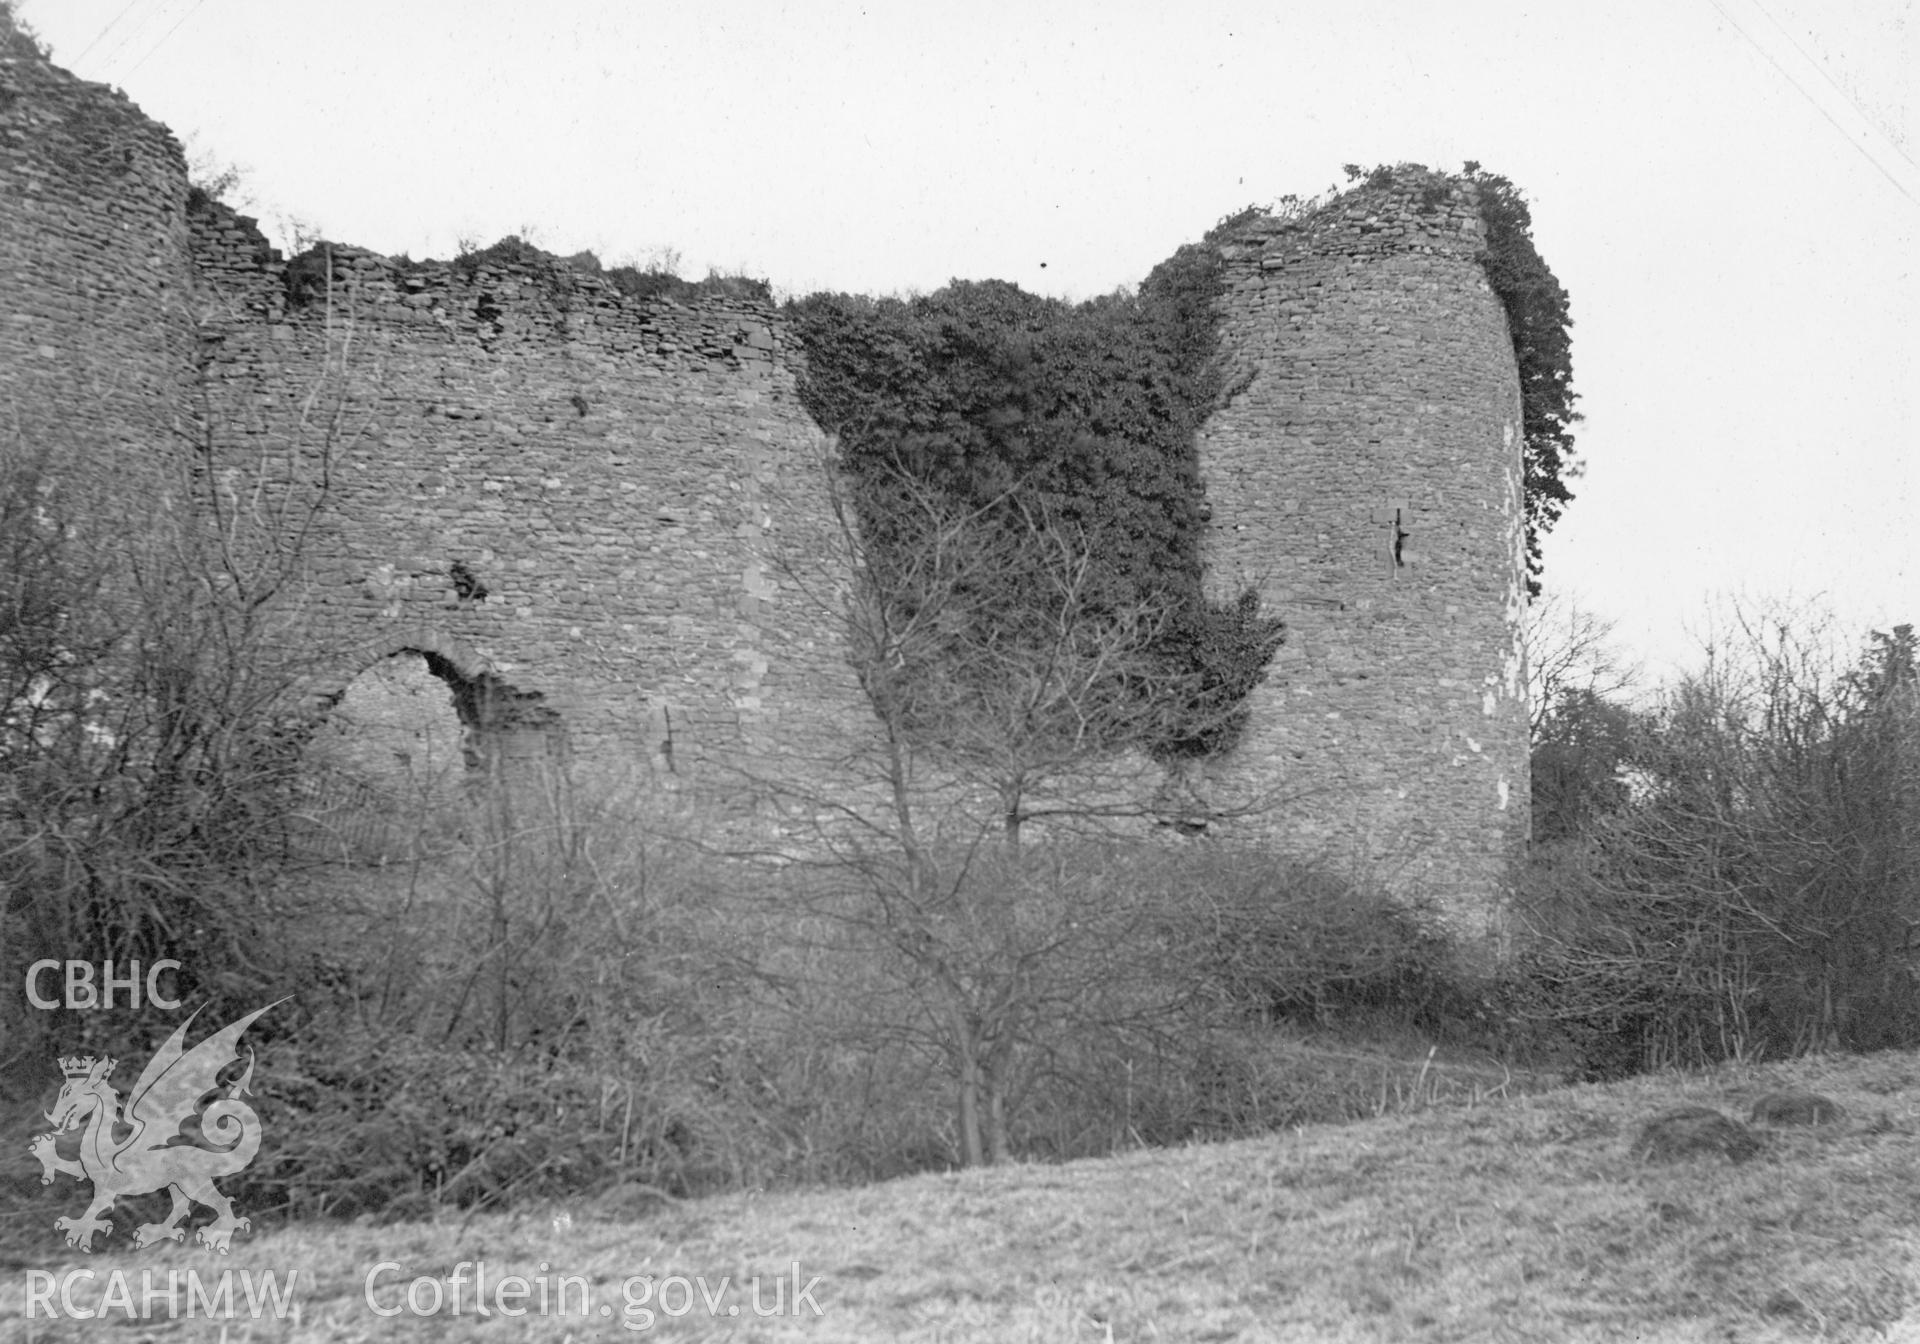 Digital copy of a photograph showing White Castle, dated 1920.